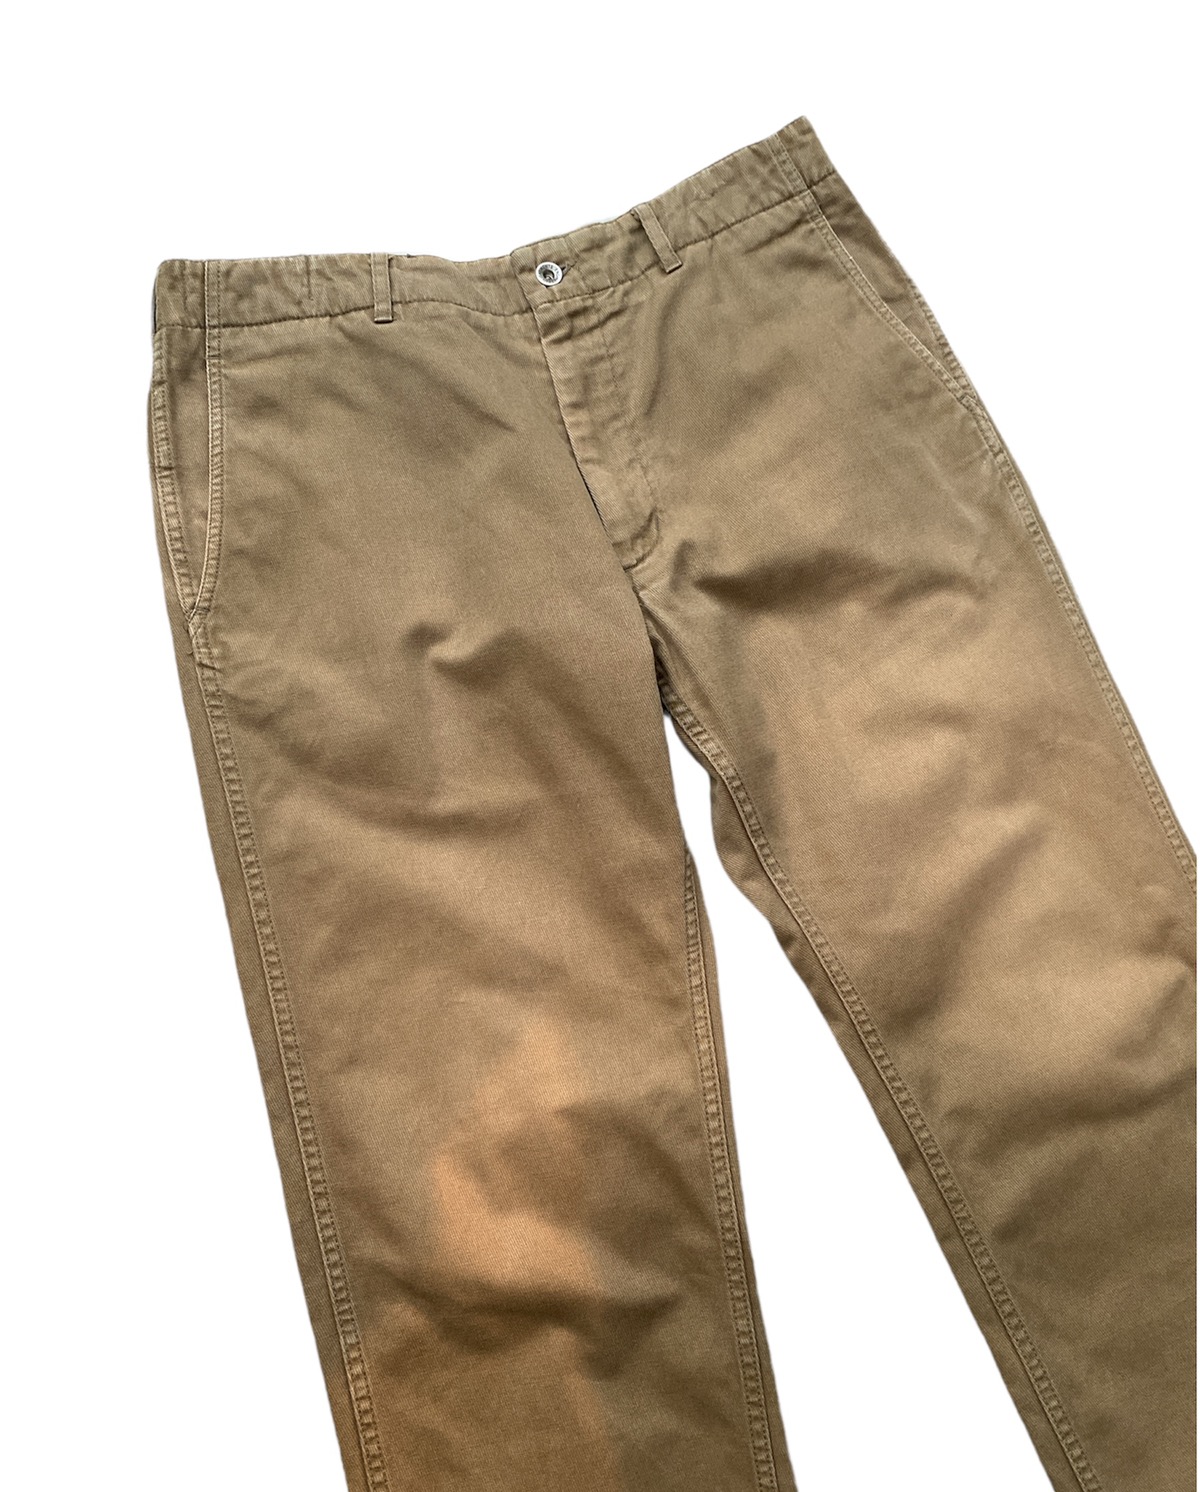 Vintage Engineered Garment Nepenthes Cargo Pants - 3